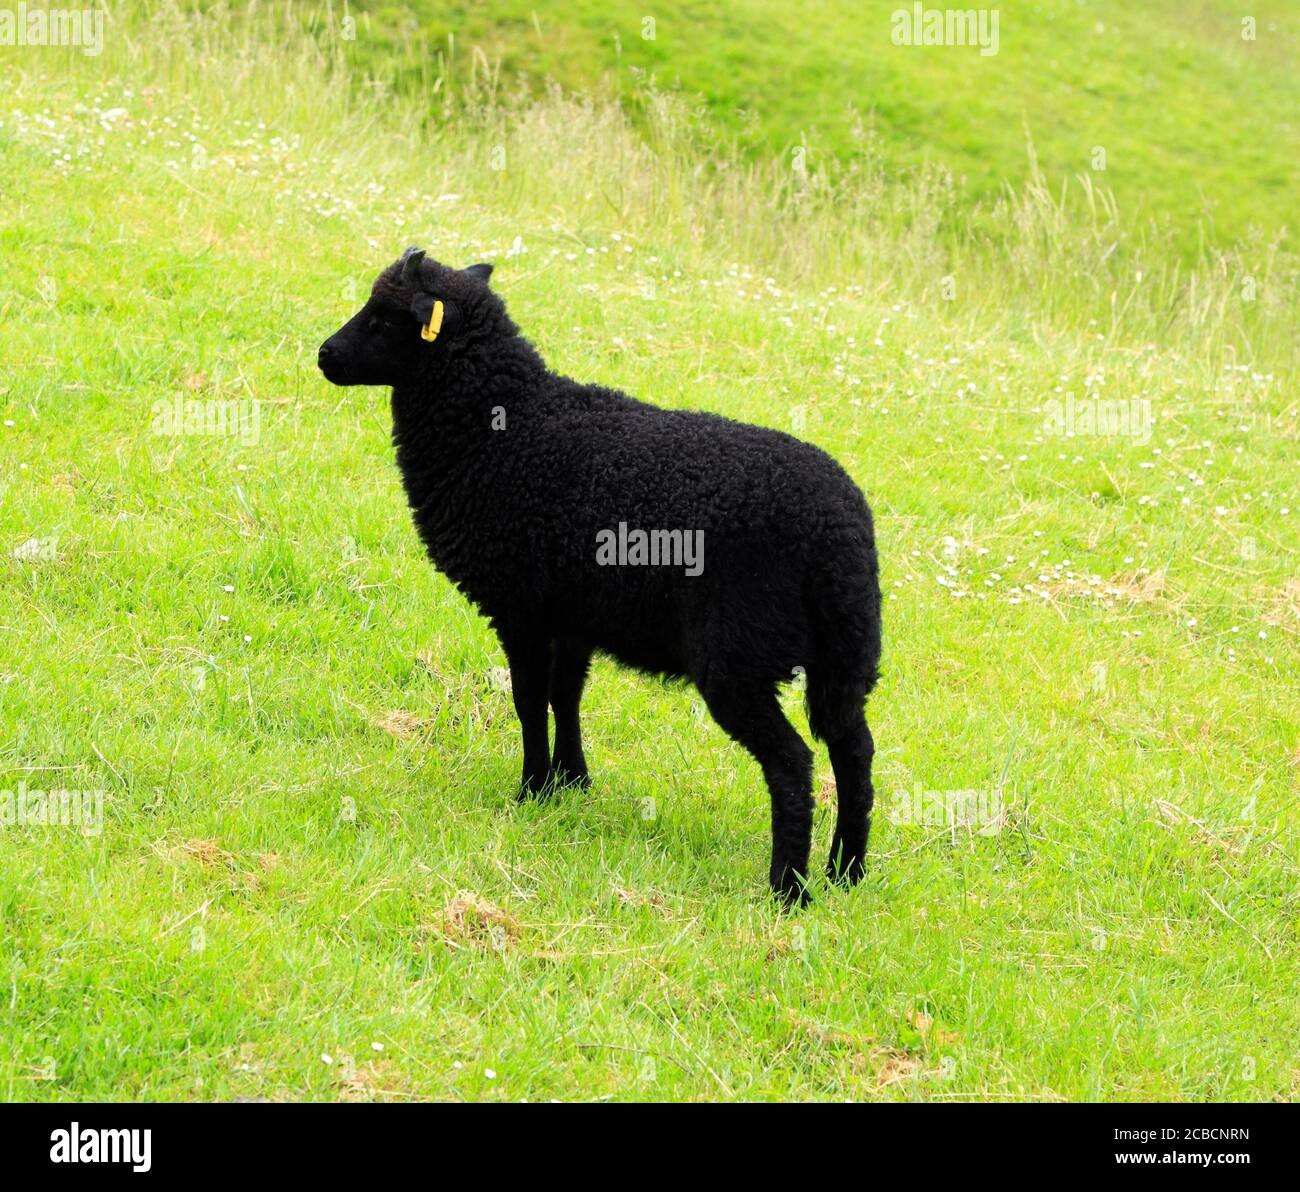 Black Moorland Sheep, Hutton le Hole, North Yorkshire Moors, Angleterre, Royaume-Uni Banque D'Images